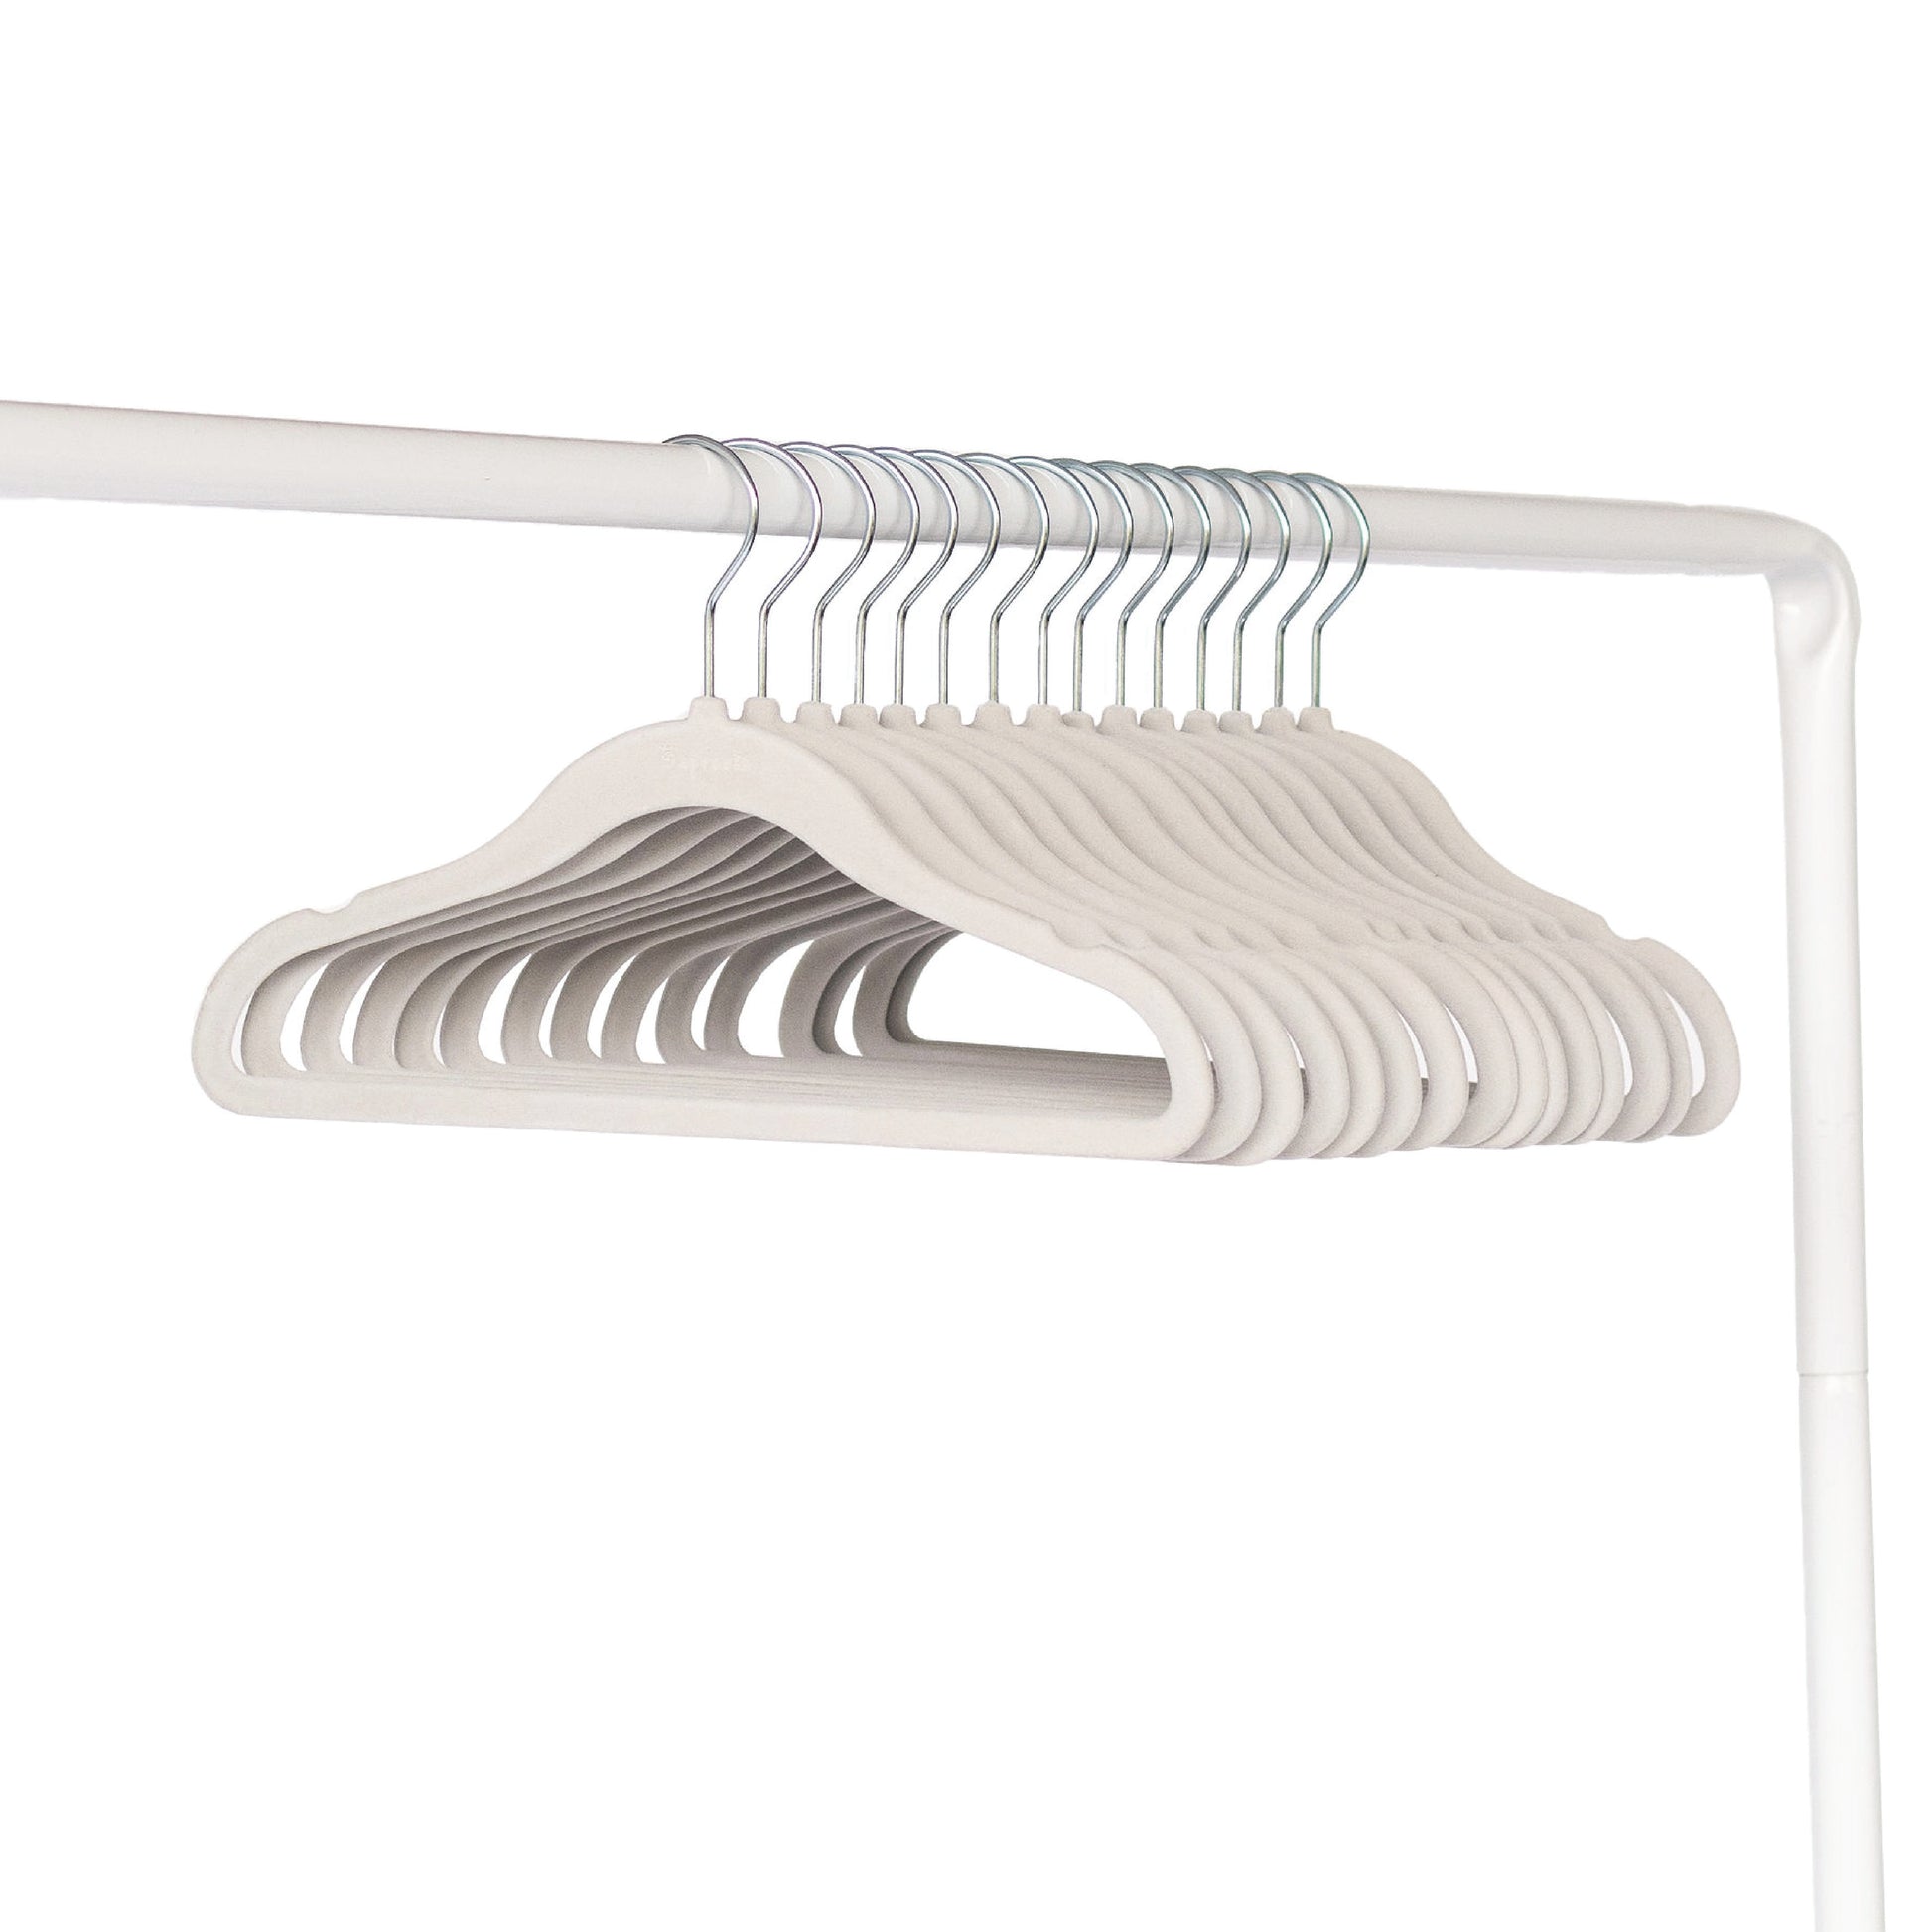 Set Of 10 Gray Velvet Hangers With Anti-slip Feature For Adult